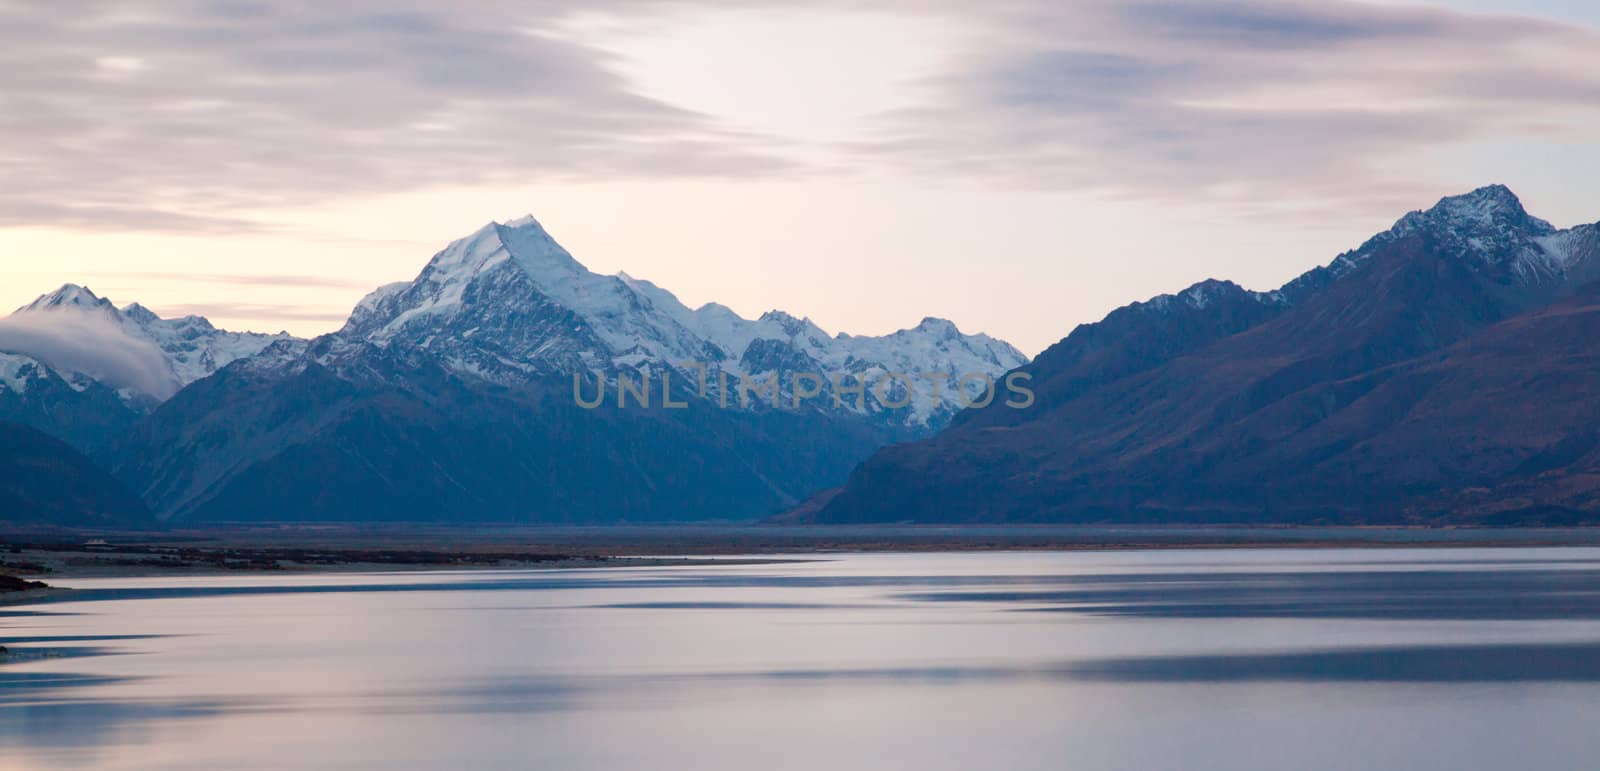 Mount cook Sunset New Zealand by vichie81